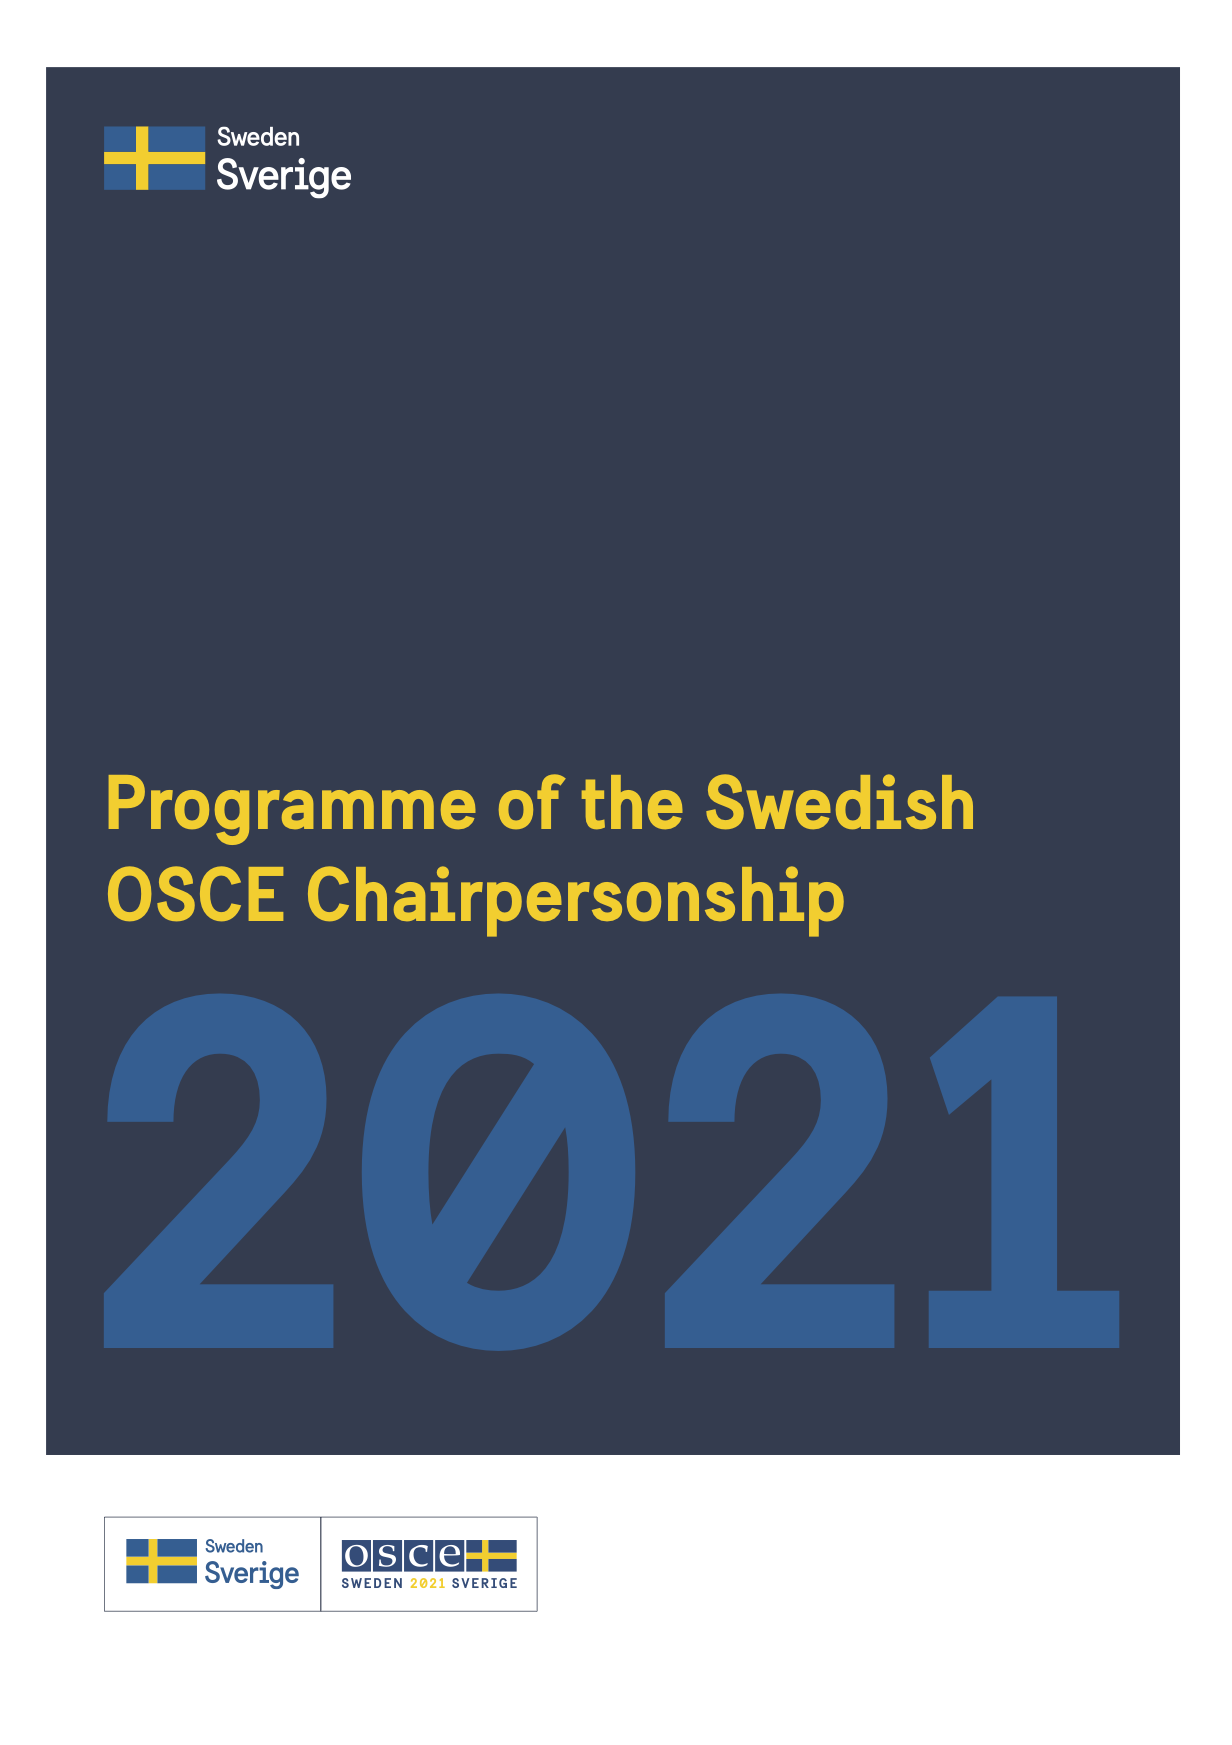 Programme of the Swedish OSCE Chairpersonship 2021